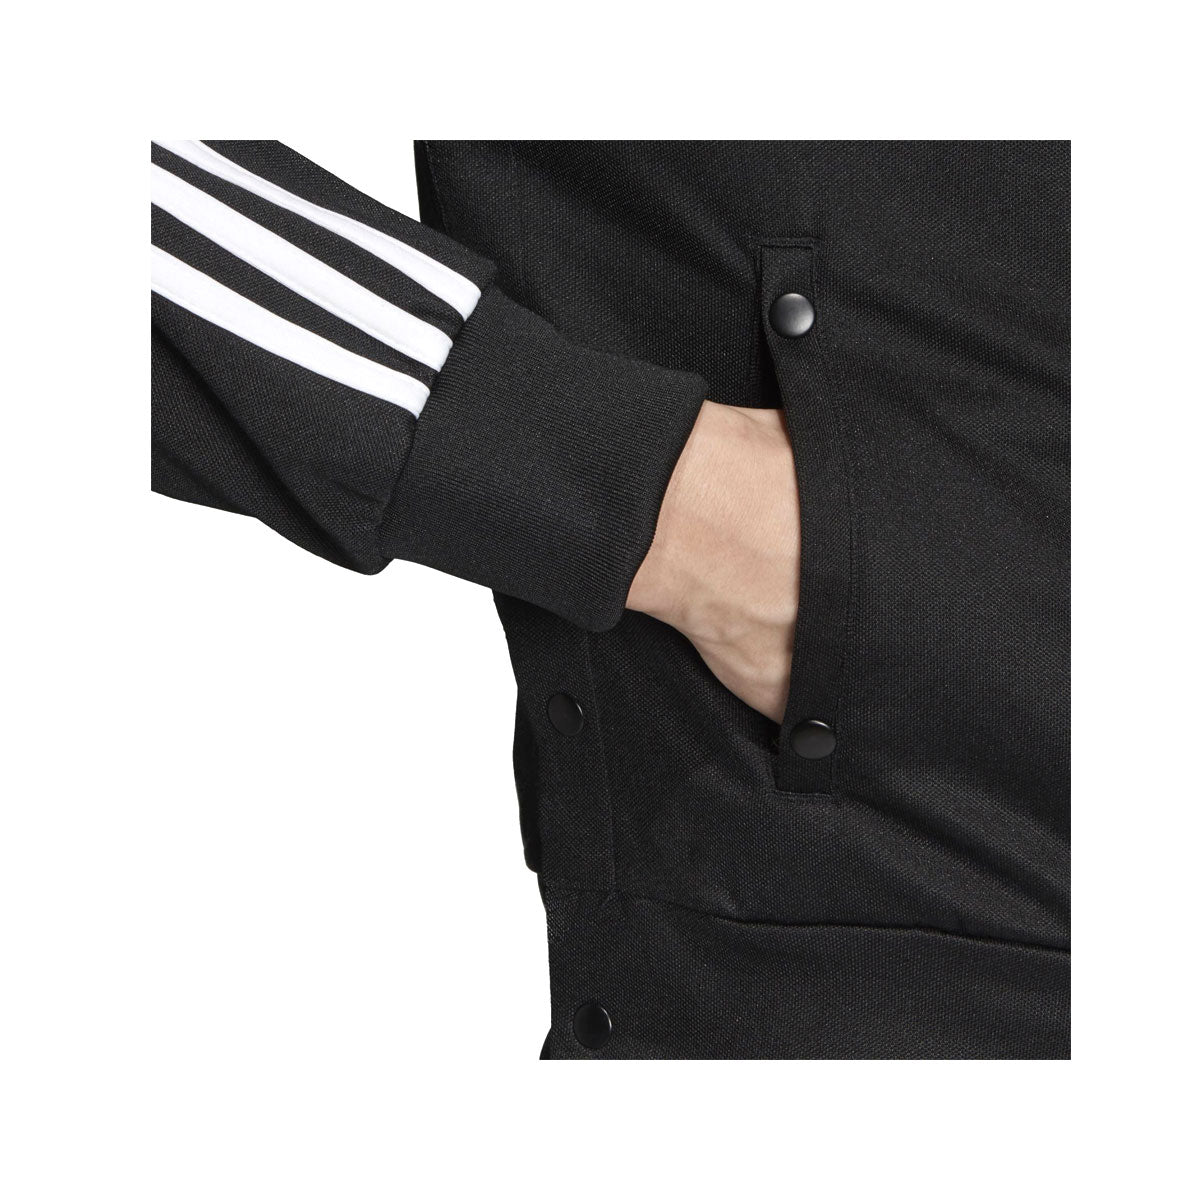 Adidas Women's ID 3-Stripes Snap Track Top